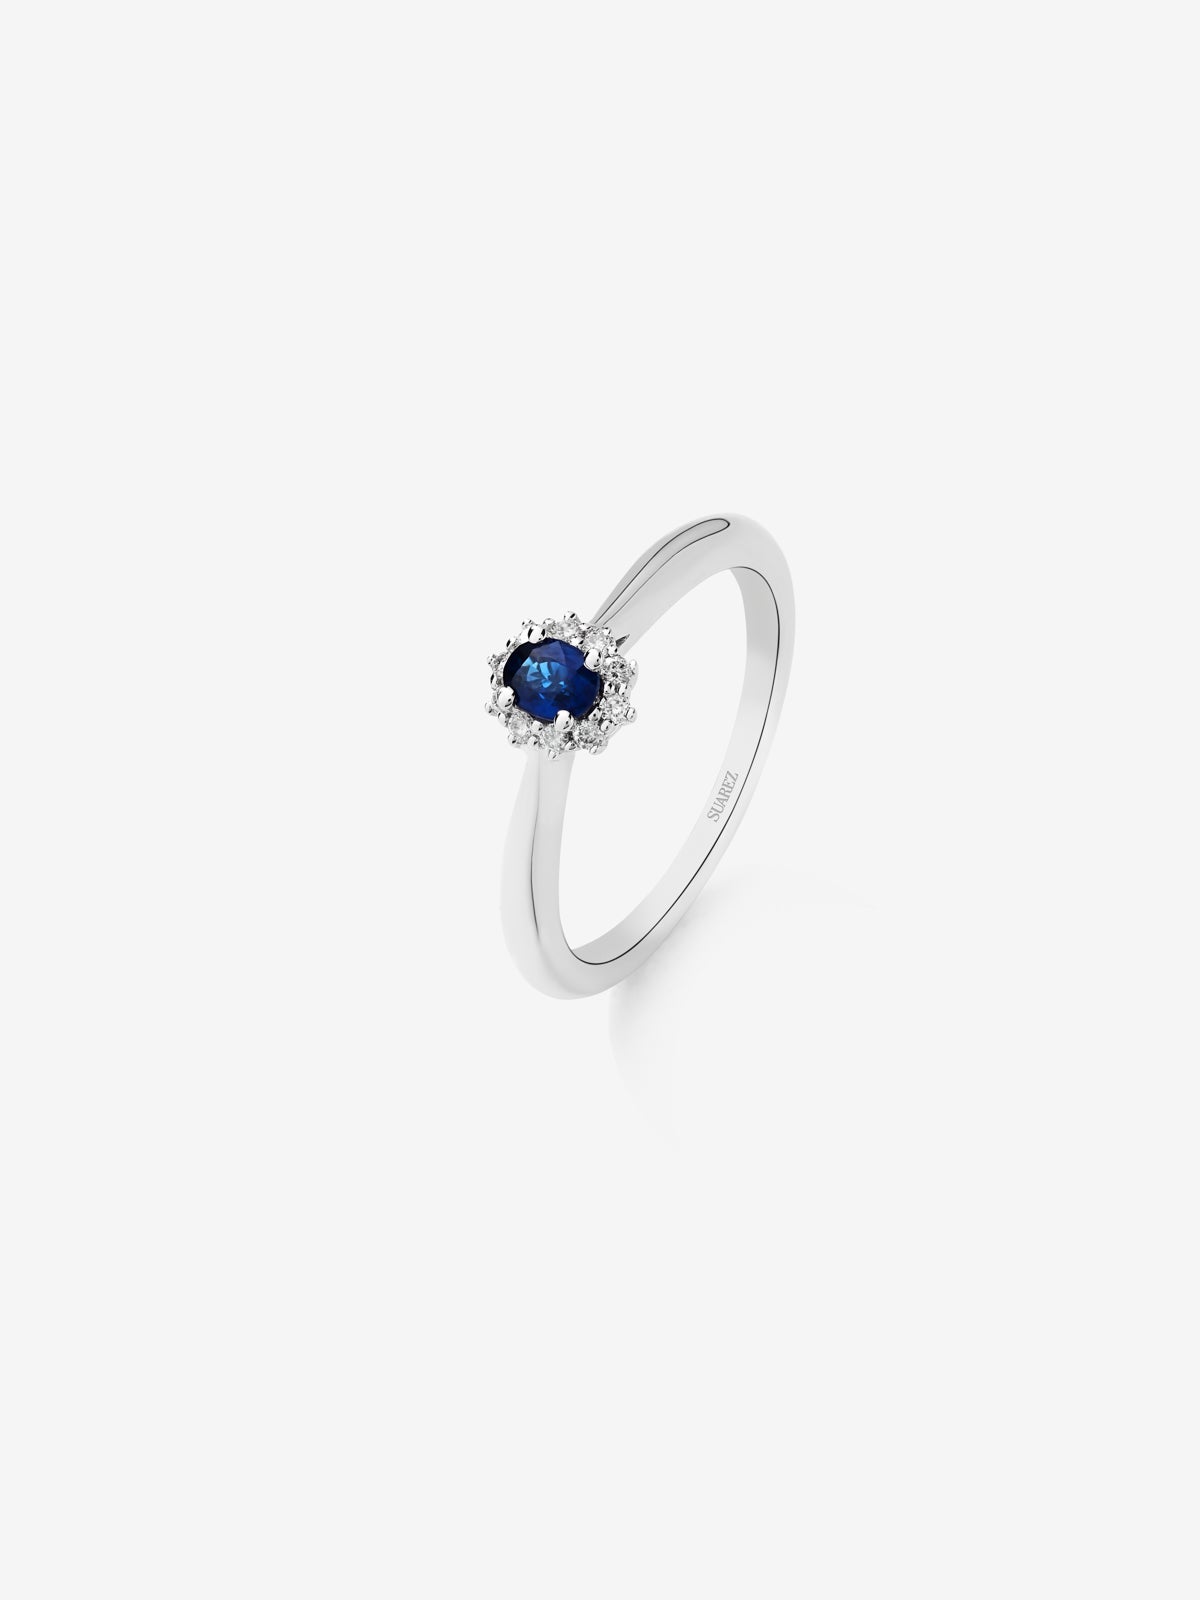 18K white gold ring with oval-cut blue sapphire and brilliant-cut white diamonds